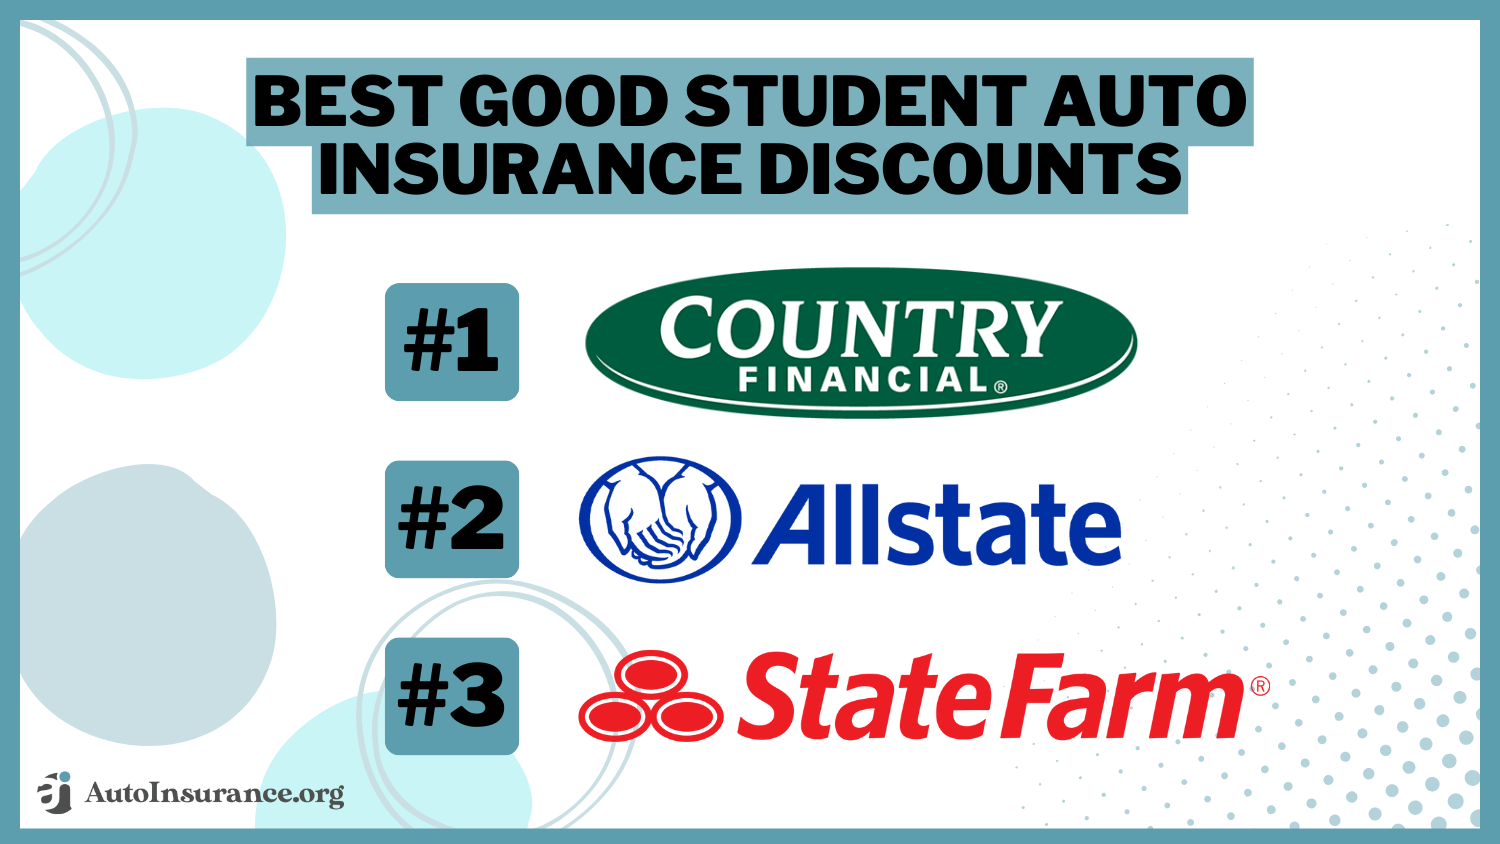 Best Good Student Auto Insurance Discounts: Country Financial, Allstate, and State Farm